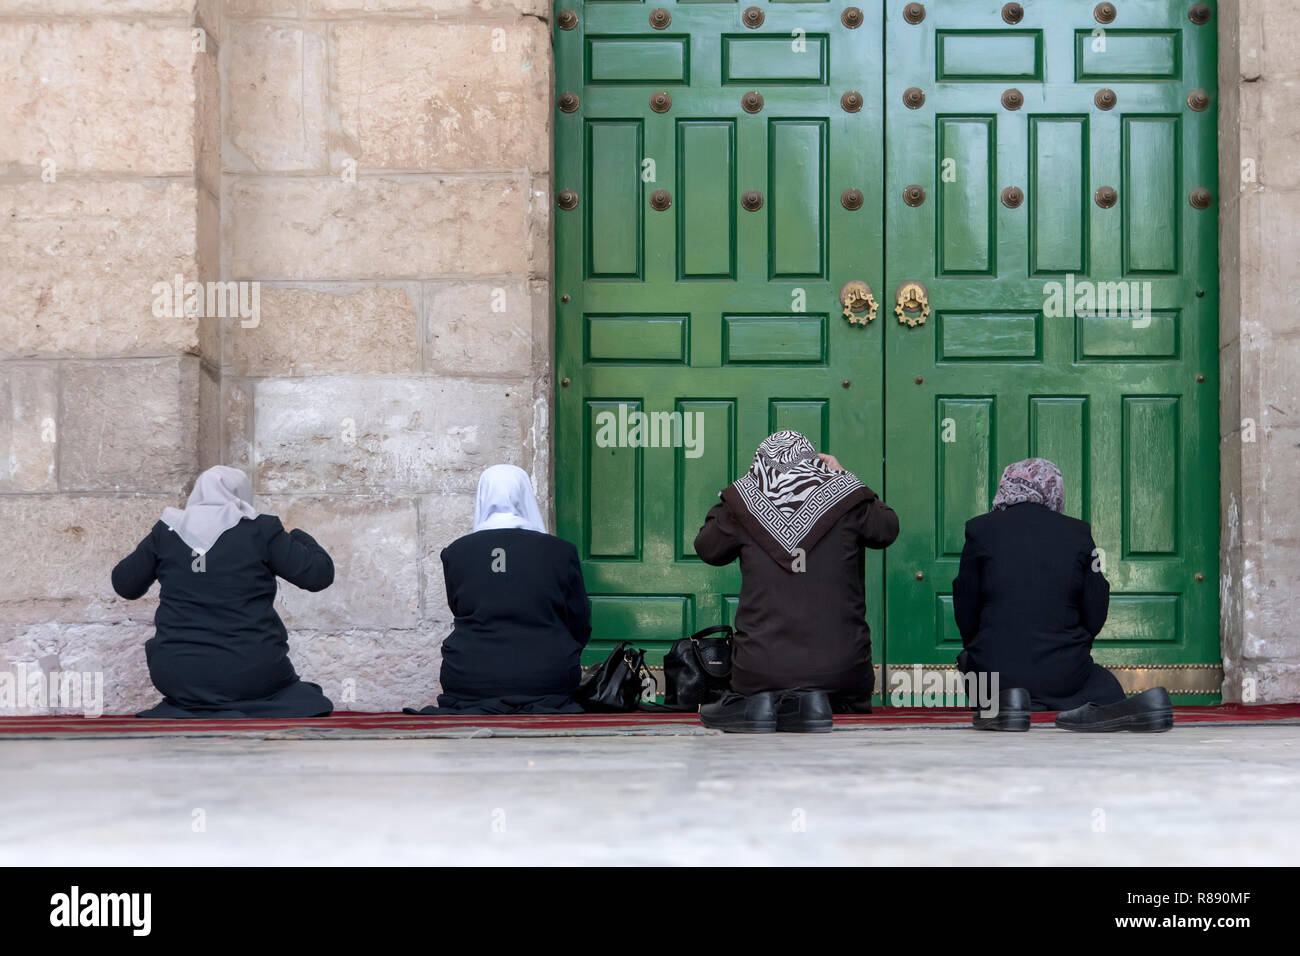 four women pray on their knees in front of the green closed door of the old mosque Dome of the Rock in the Muslim quarter of the old city of Jerusalem Stock Photo